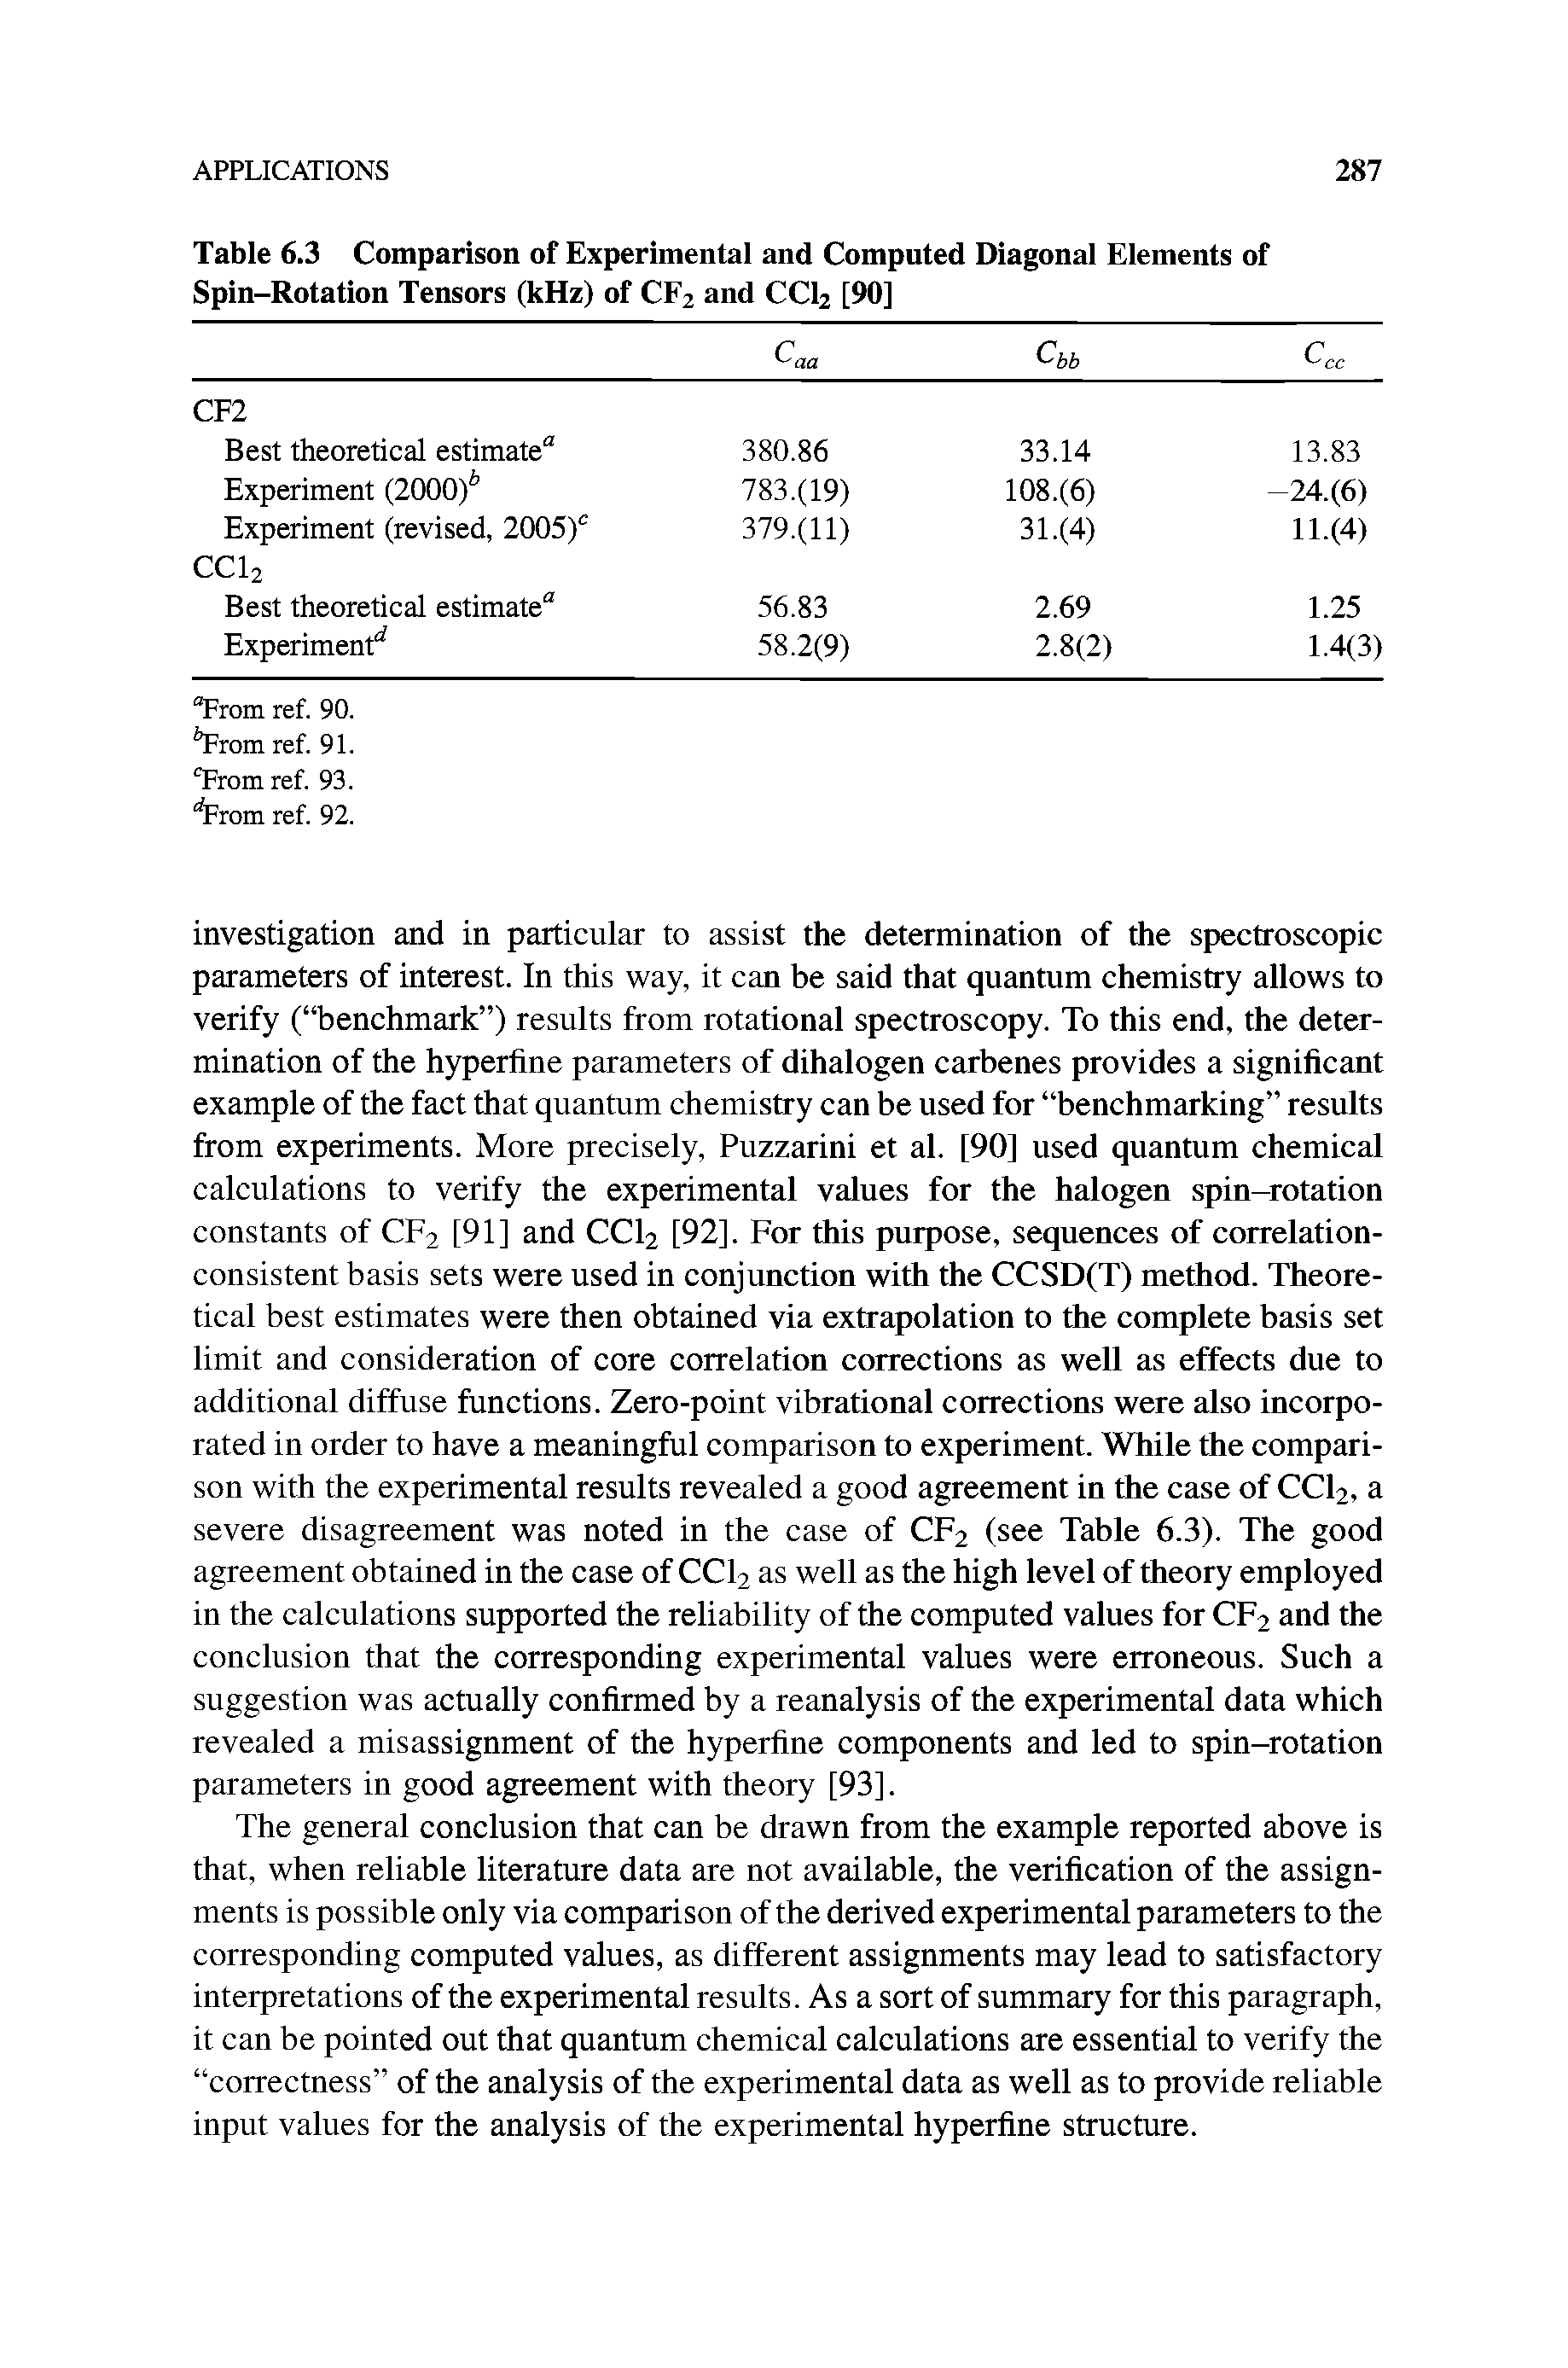 Table 6.3 Comparison of Experimental and Computed Diagonal Elements of Spin-Rotation Tensors (kHz) of CF2 and CCI2 [90]...